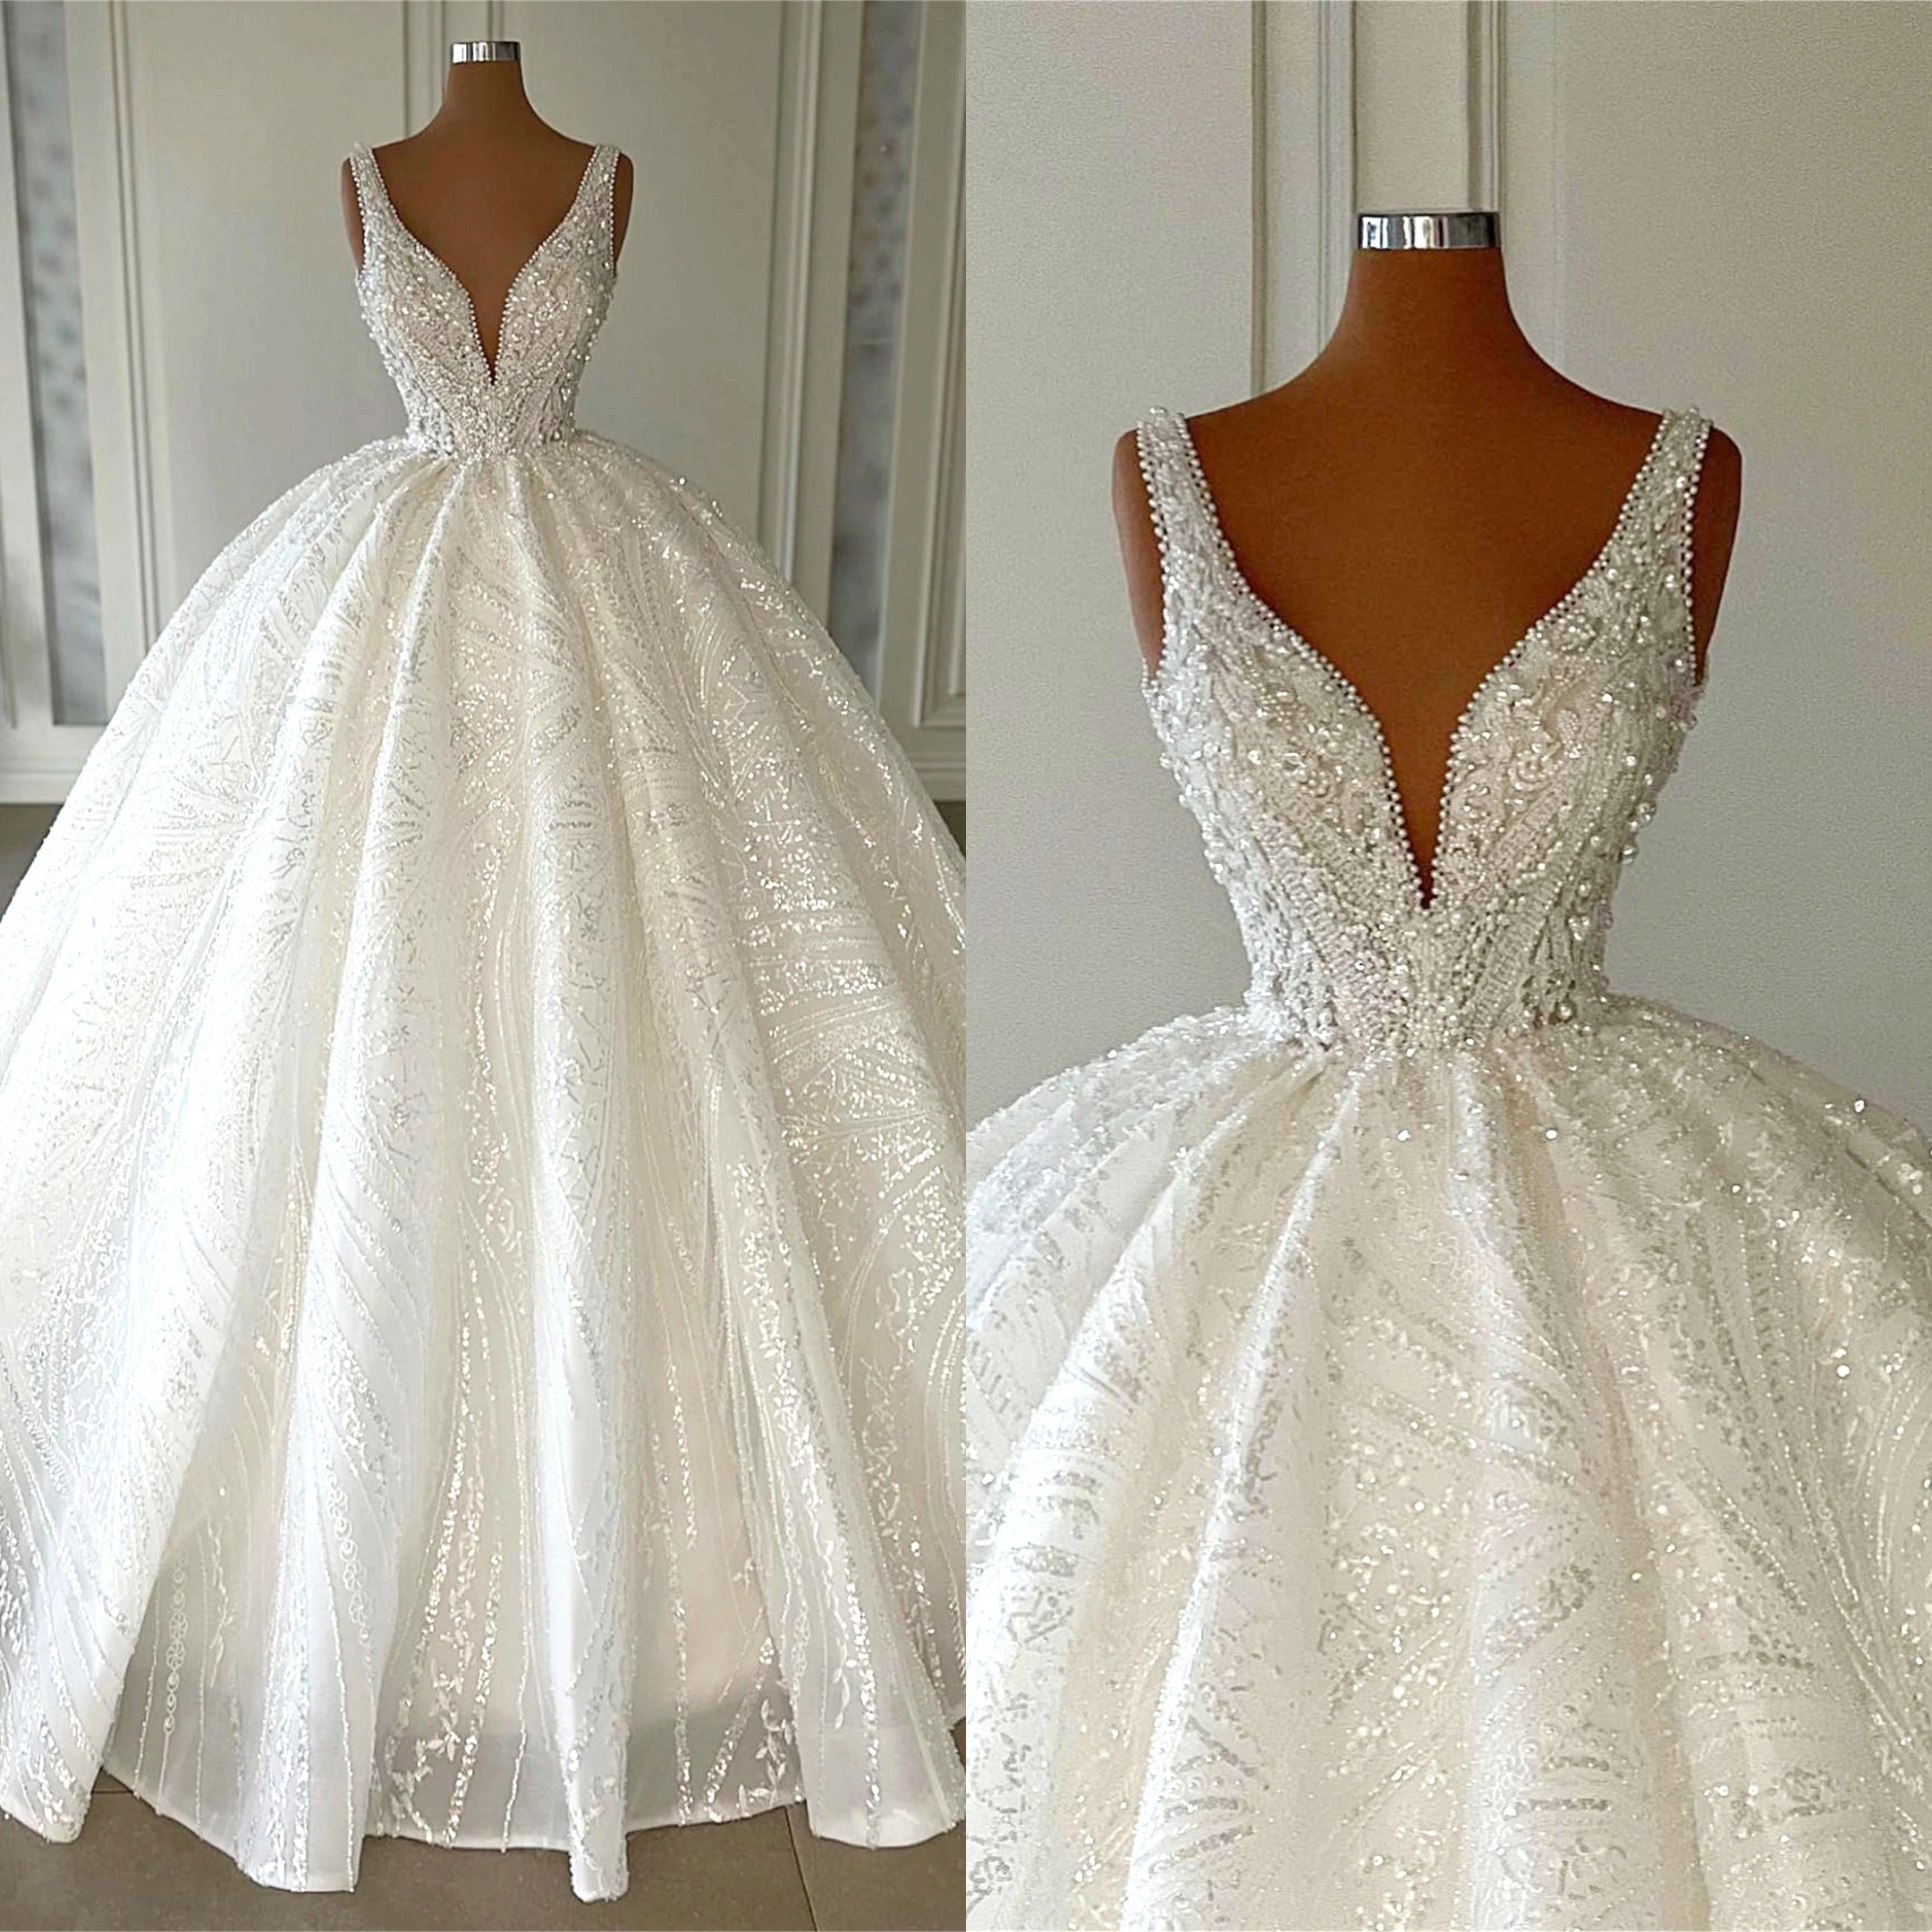 

Luxury Ball Gown Wedding Dress For Women V-Neck Sleeveless Bridal Gown Sweep Train Sequins Pearls Dresses Custom Made